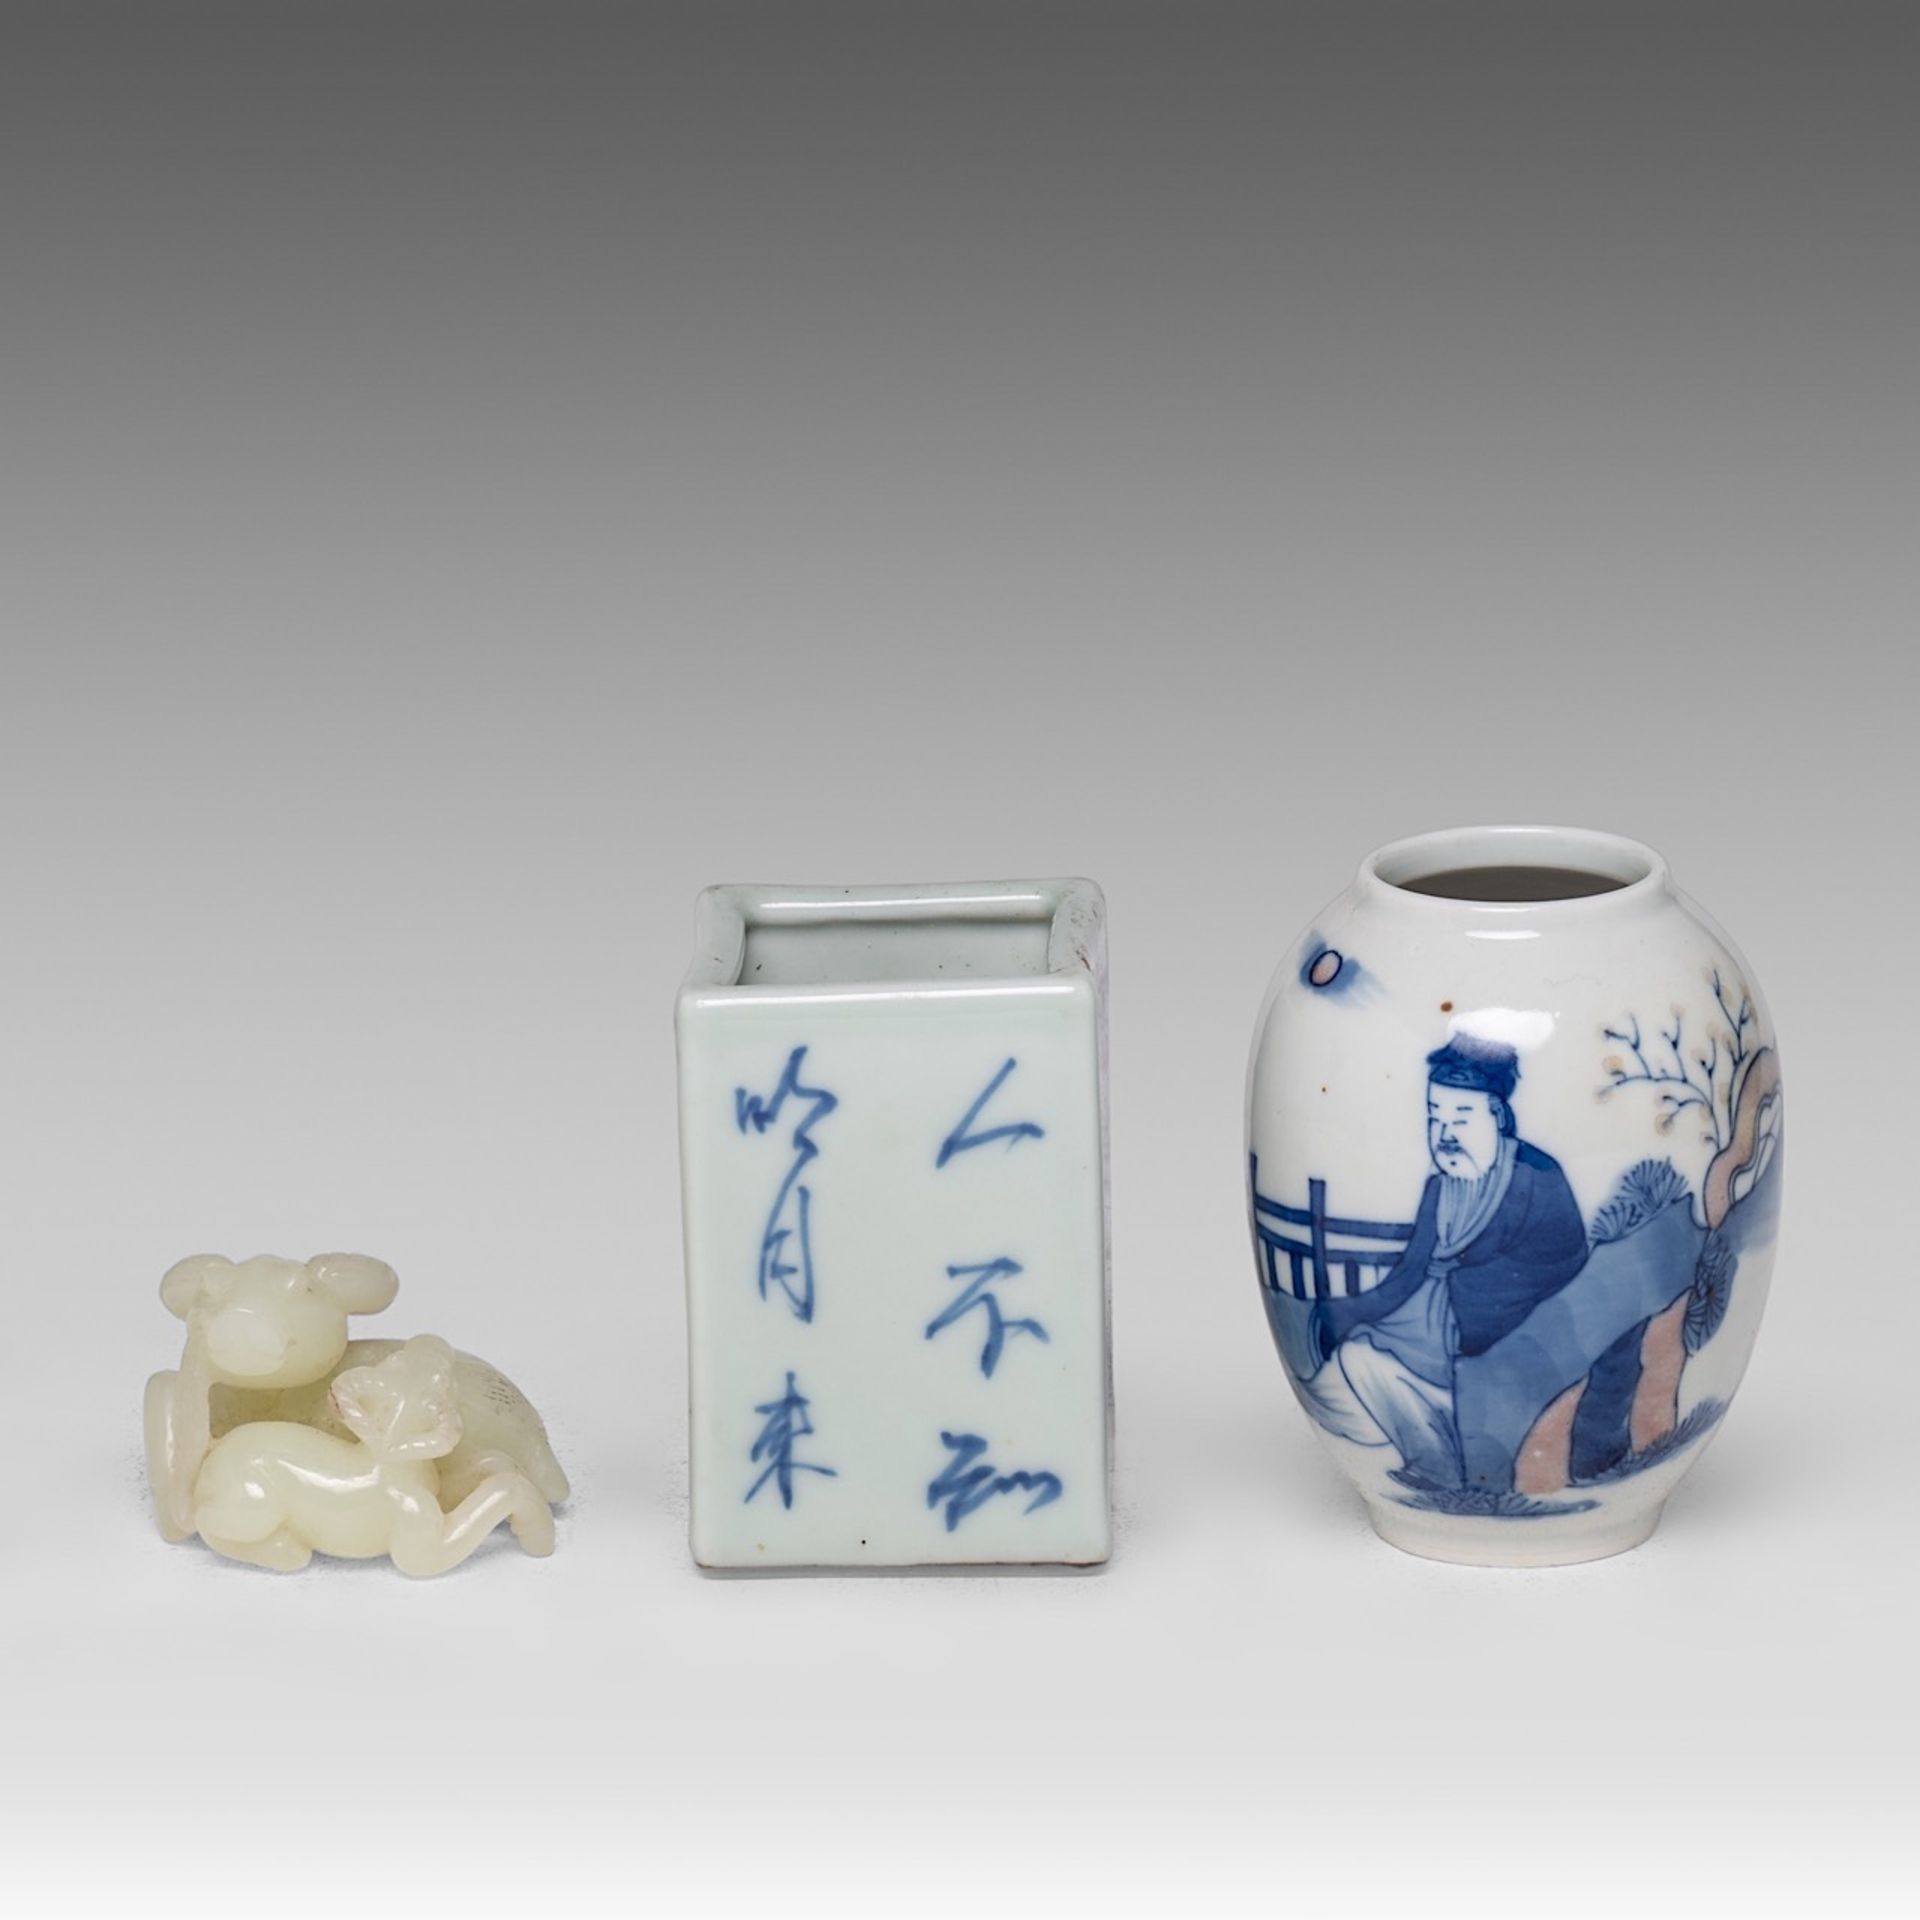 A collection of four Chinese scholar's objects, incl. a brush pot with inscriptions, late 18thC - ad - Bild 2 aus 29